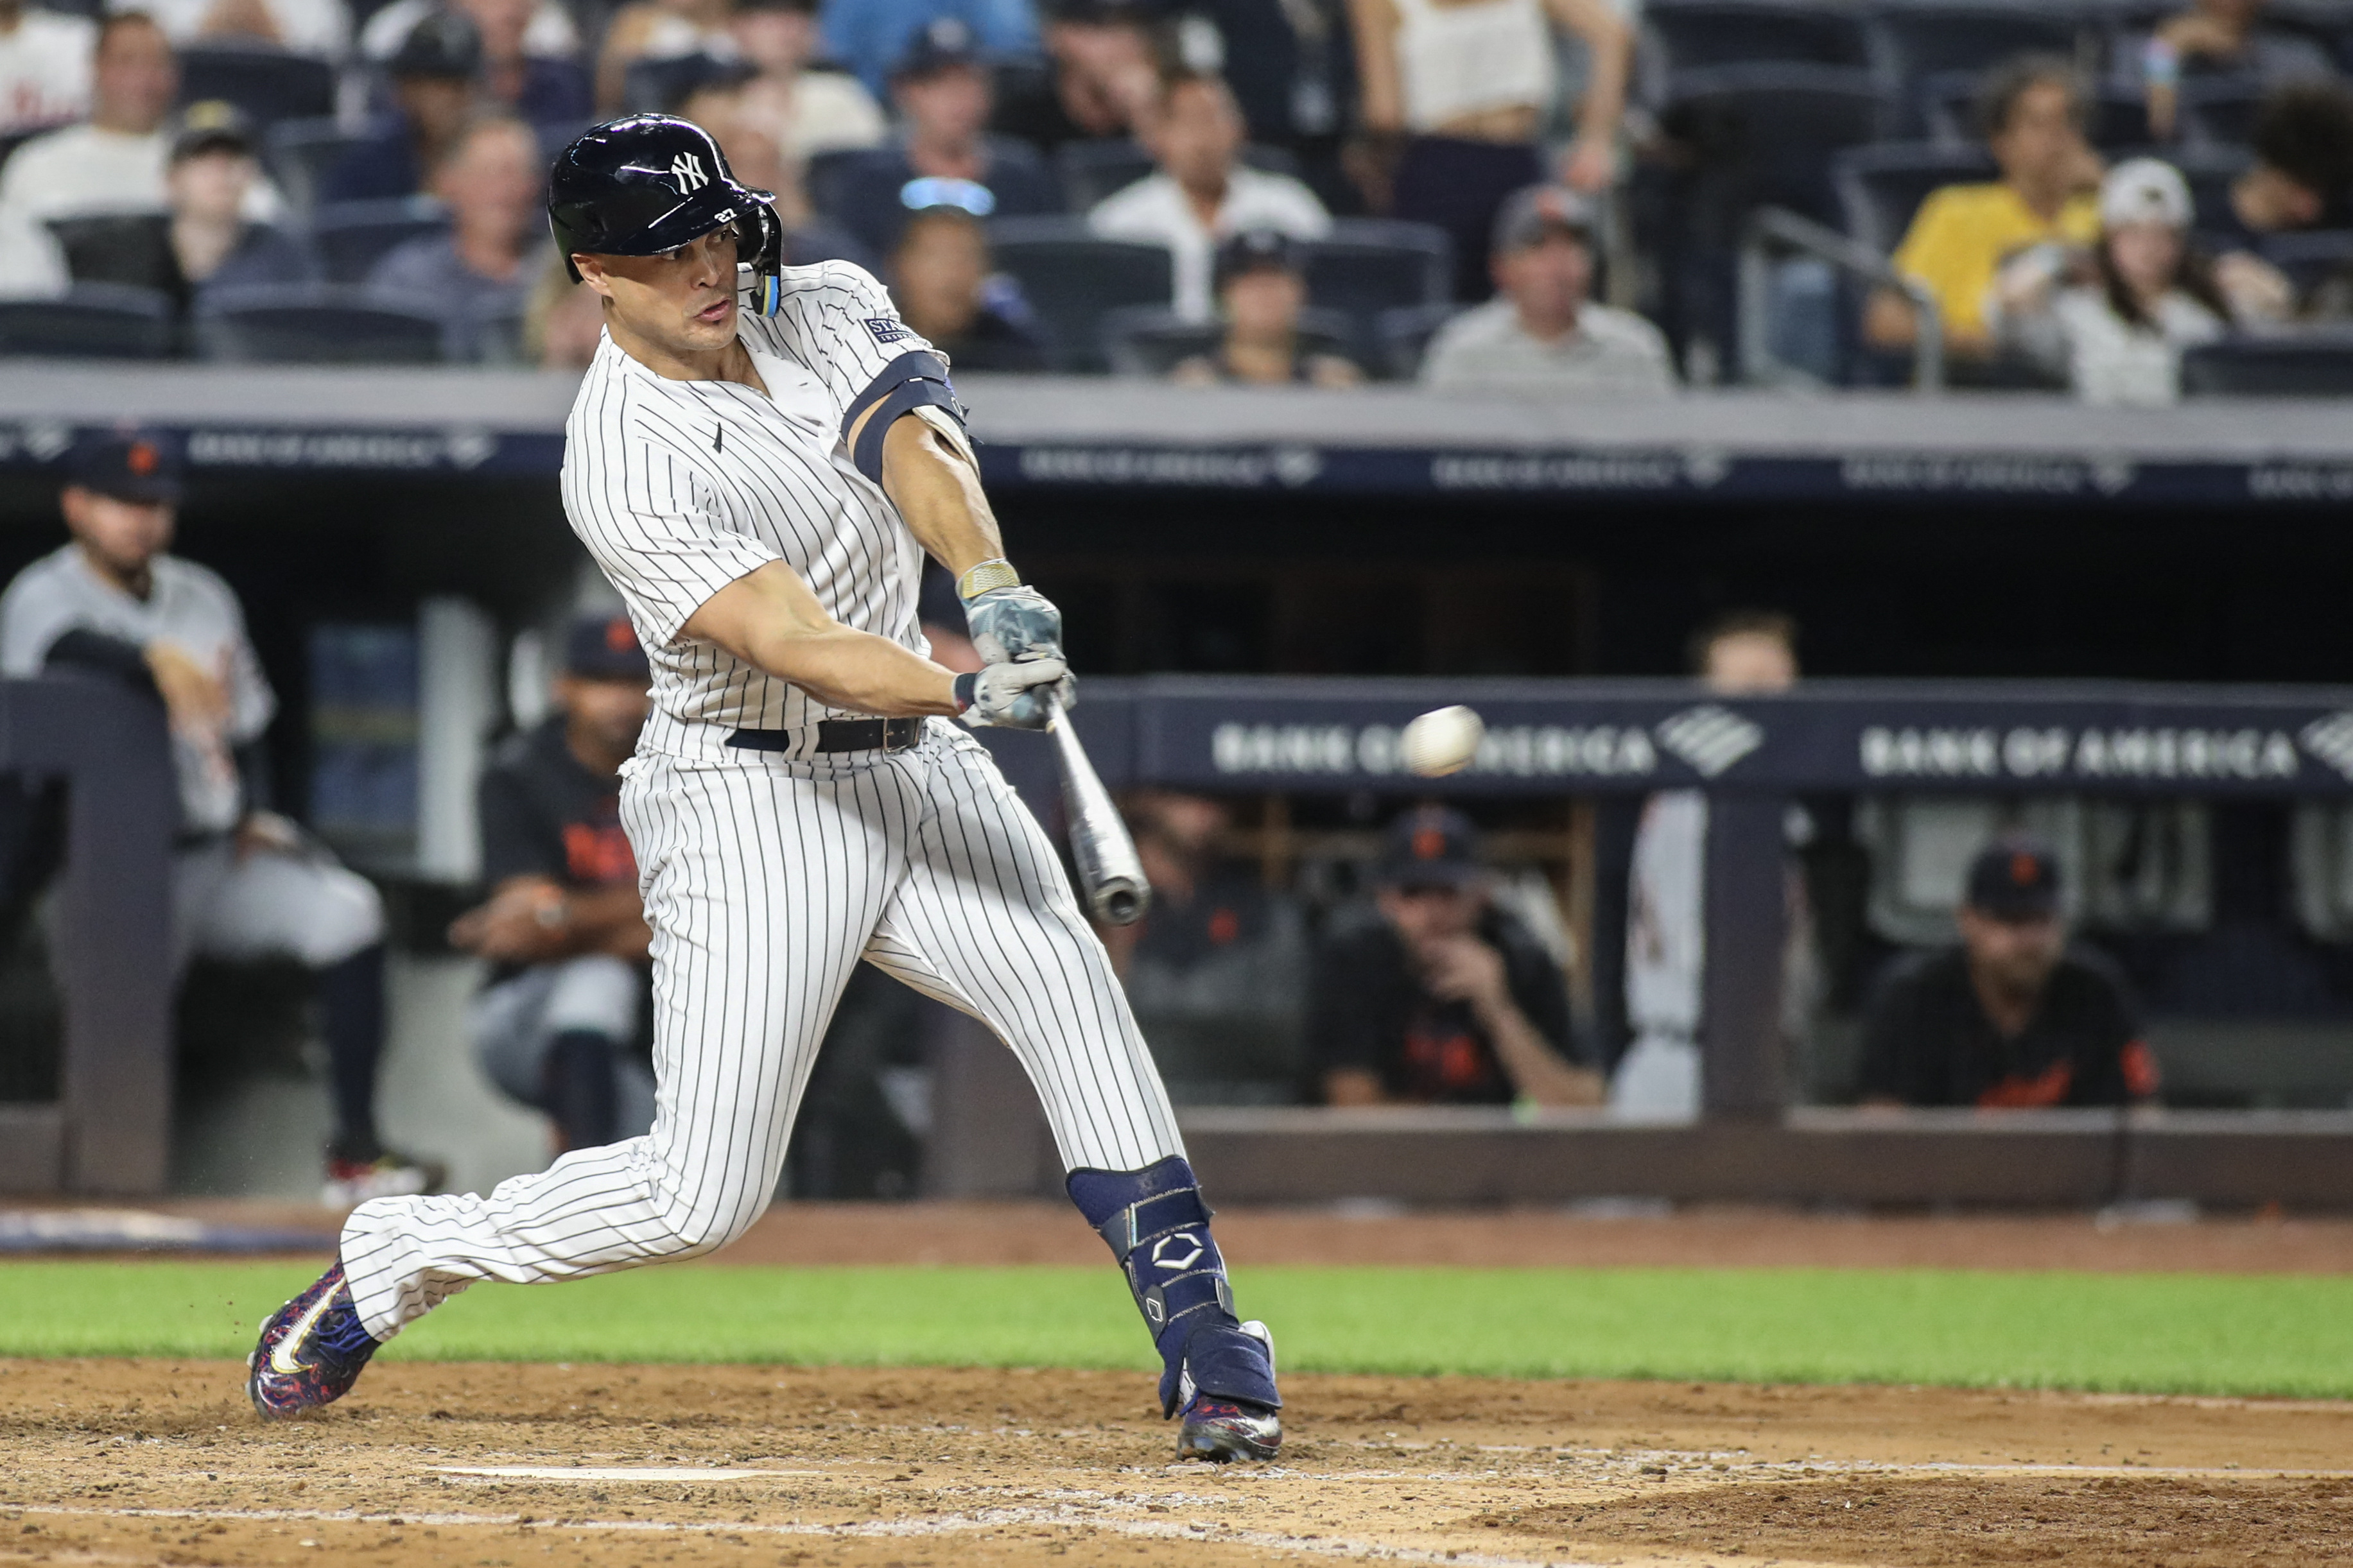 Stanton hits 400th home run to lead Yankees past Tigers, 5-1 – The